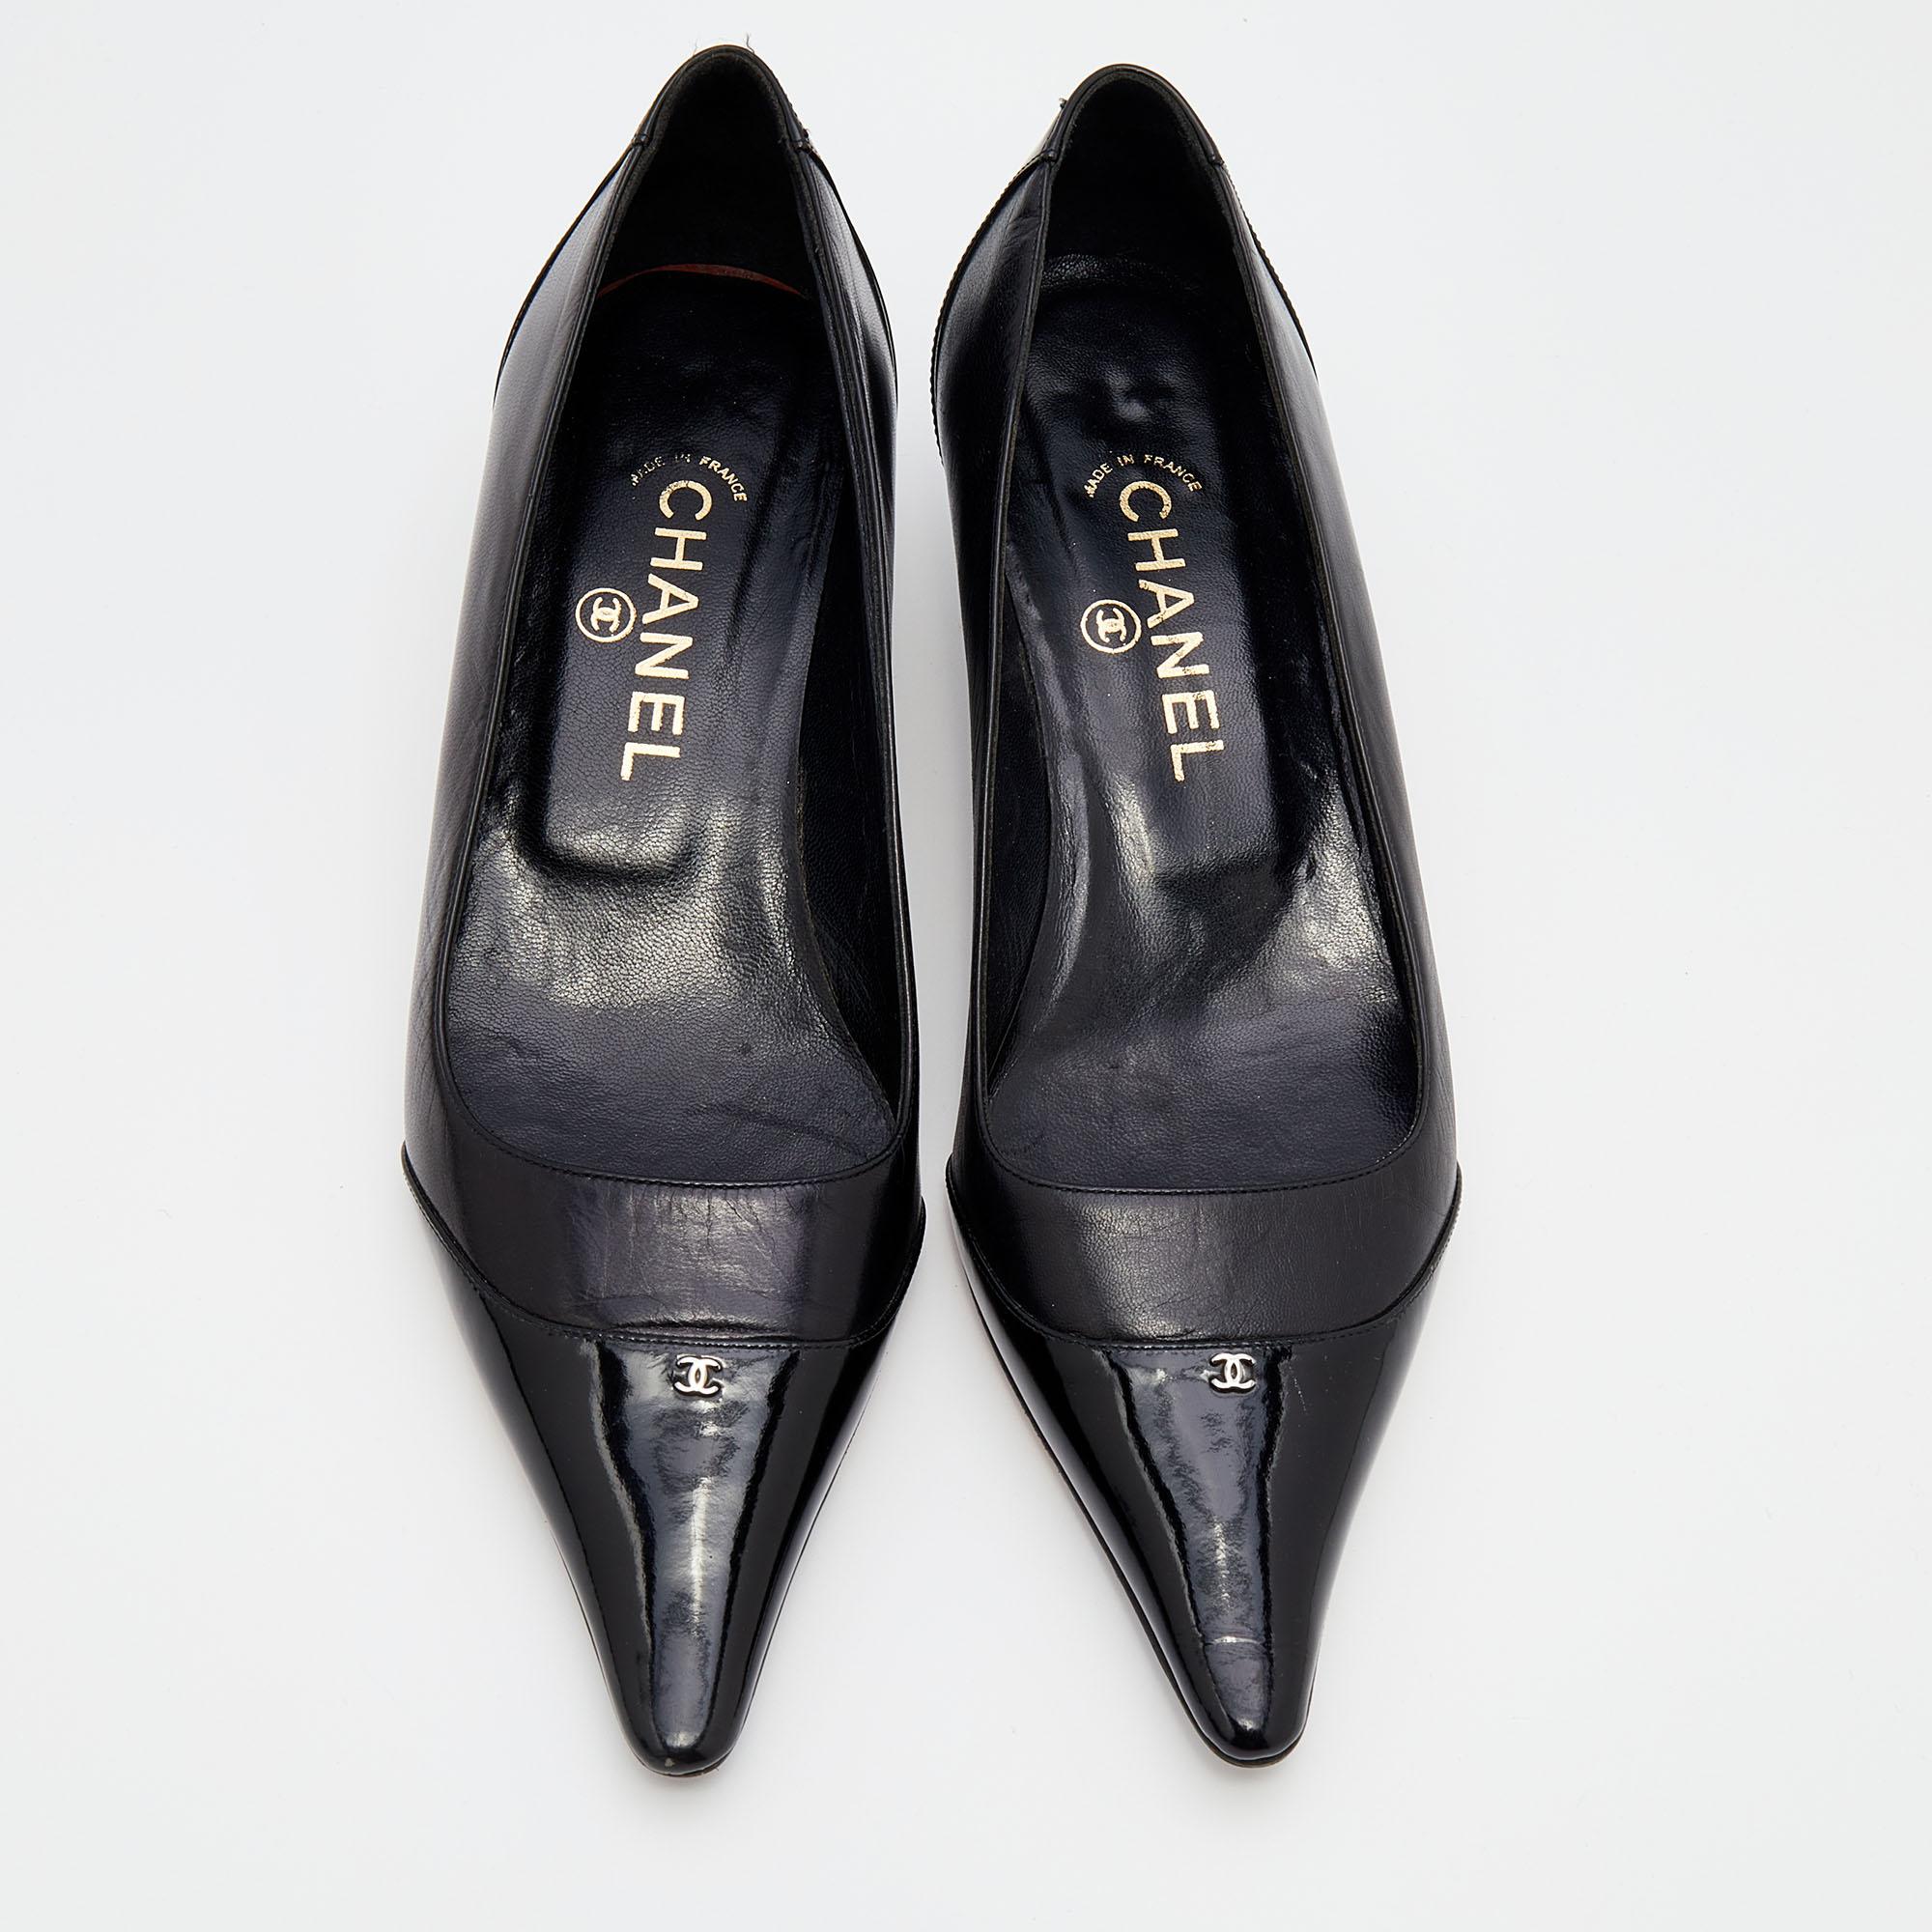 Sleek and sharp, this pair of Chanel pumps come with a perfect balance of luxury and ease. The pointed toe is designed with patent leather and is updated with a 'CC' motif on it. Made from leather, the 4cm heels of these shoes add to their